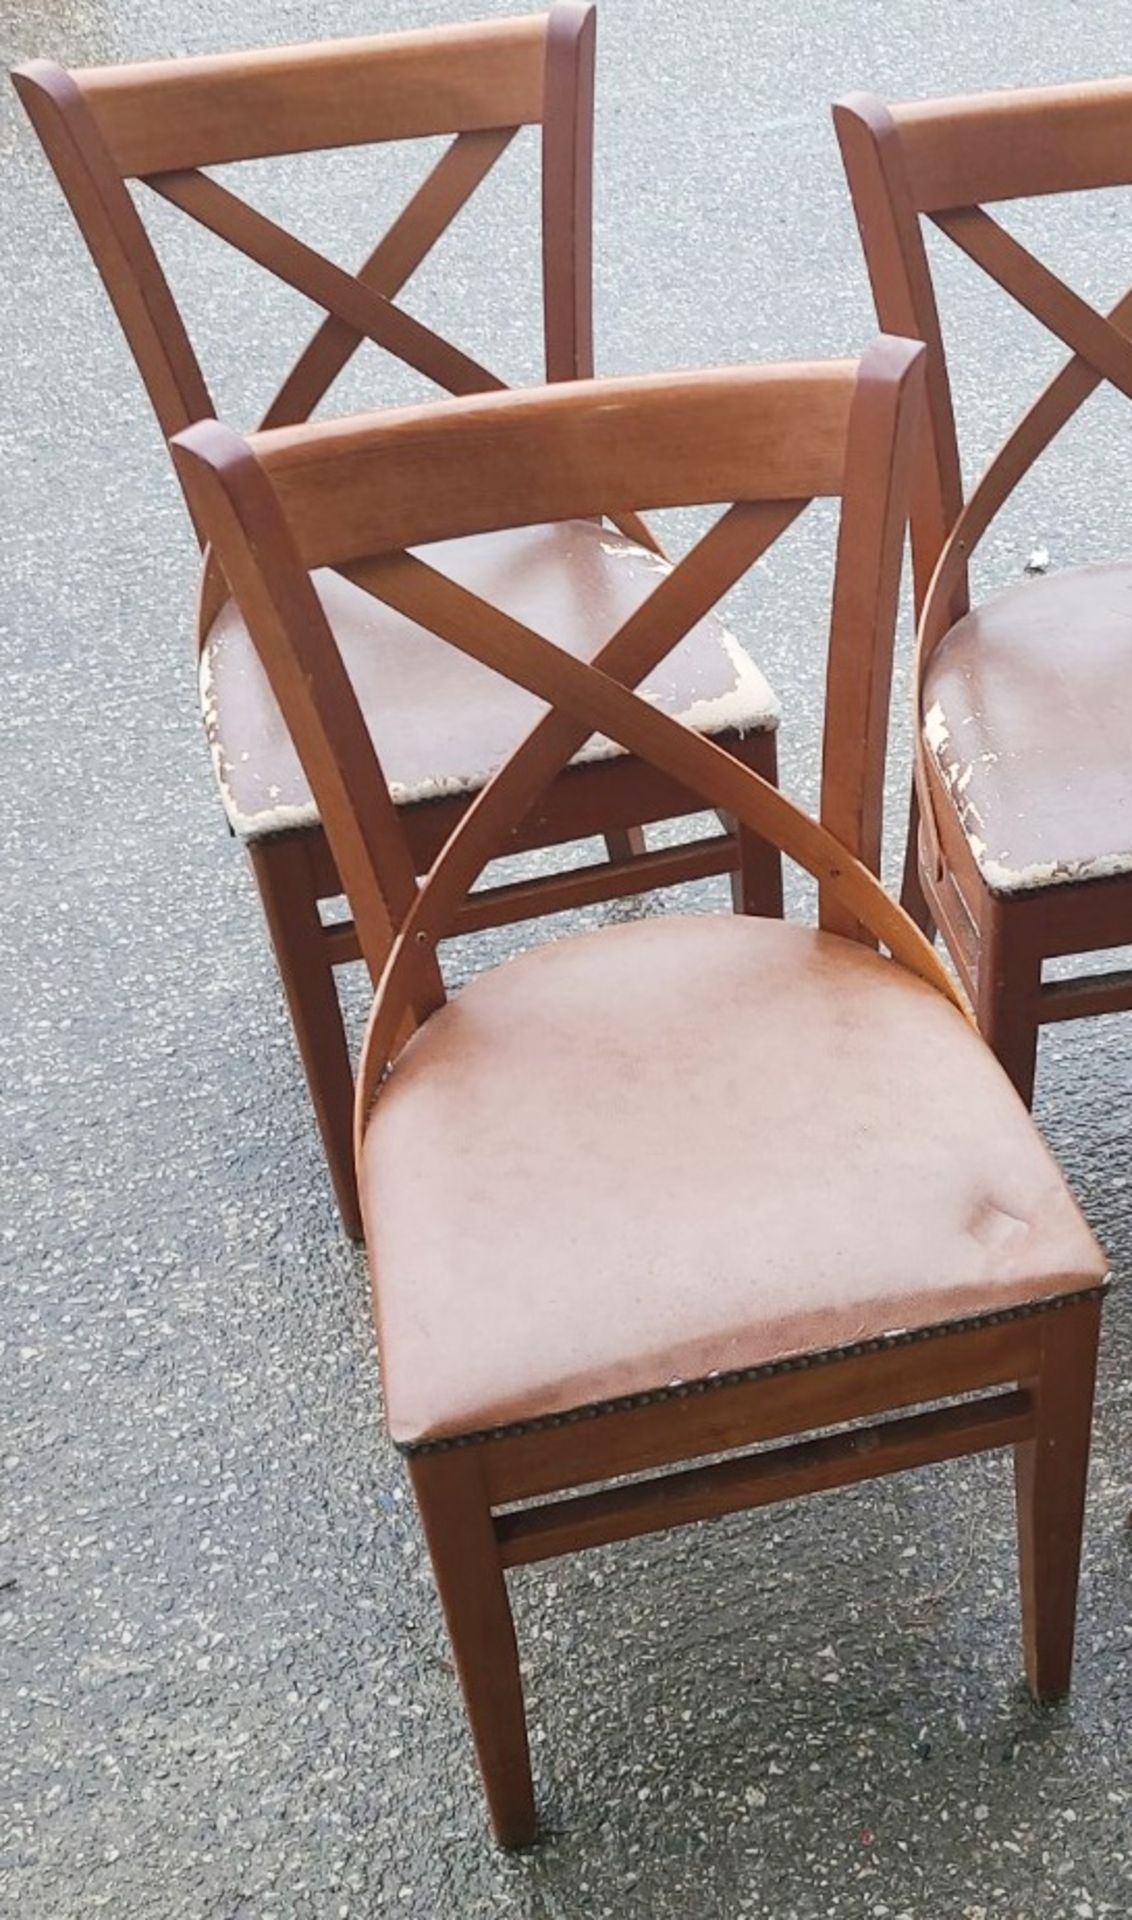 Set Of 2 x 'Leopold' Style Bentwood Side Chair In Walnut Stain & Faux Brown Leather Seat Cushion